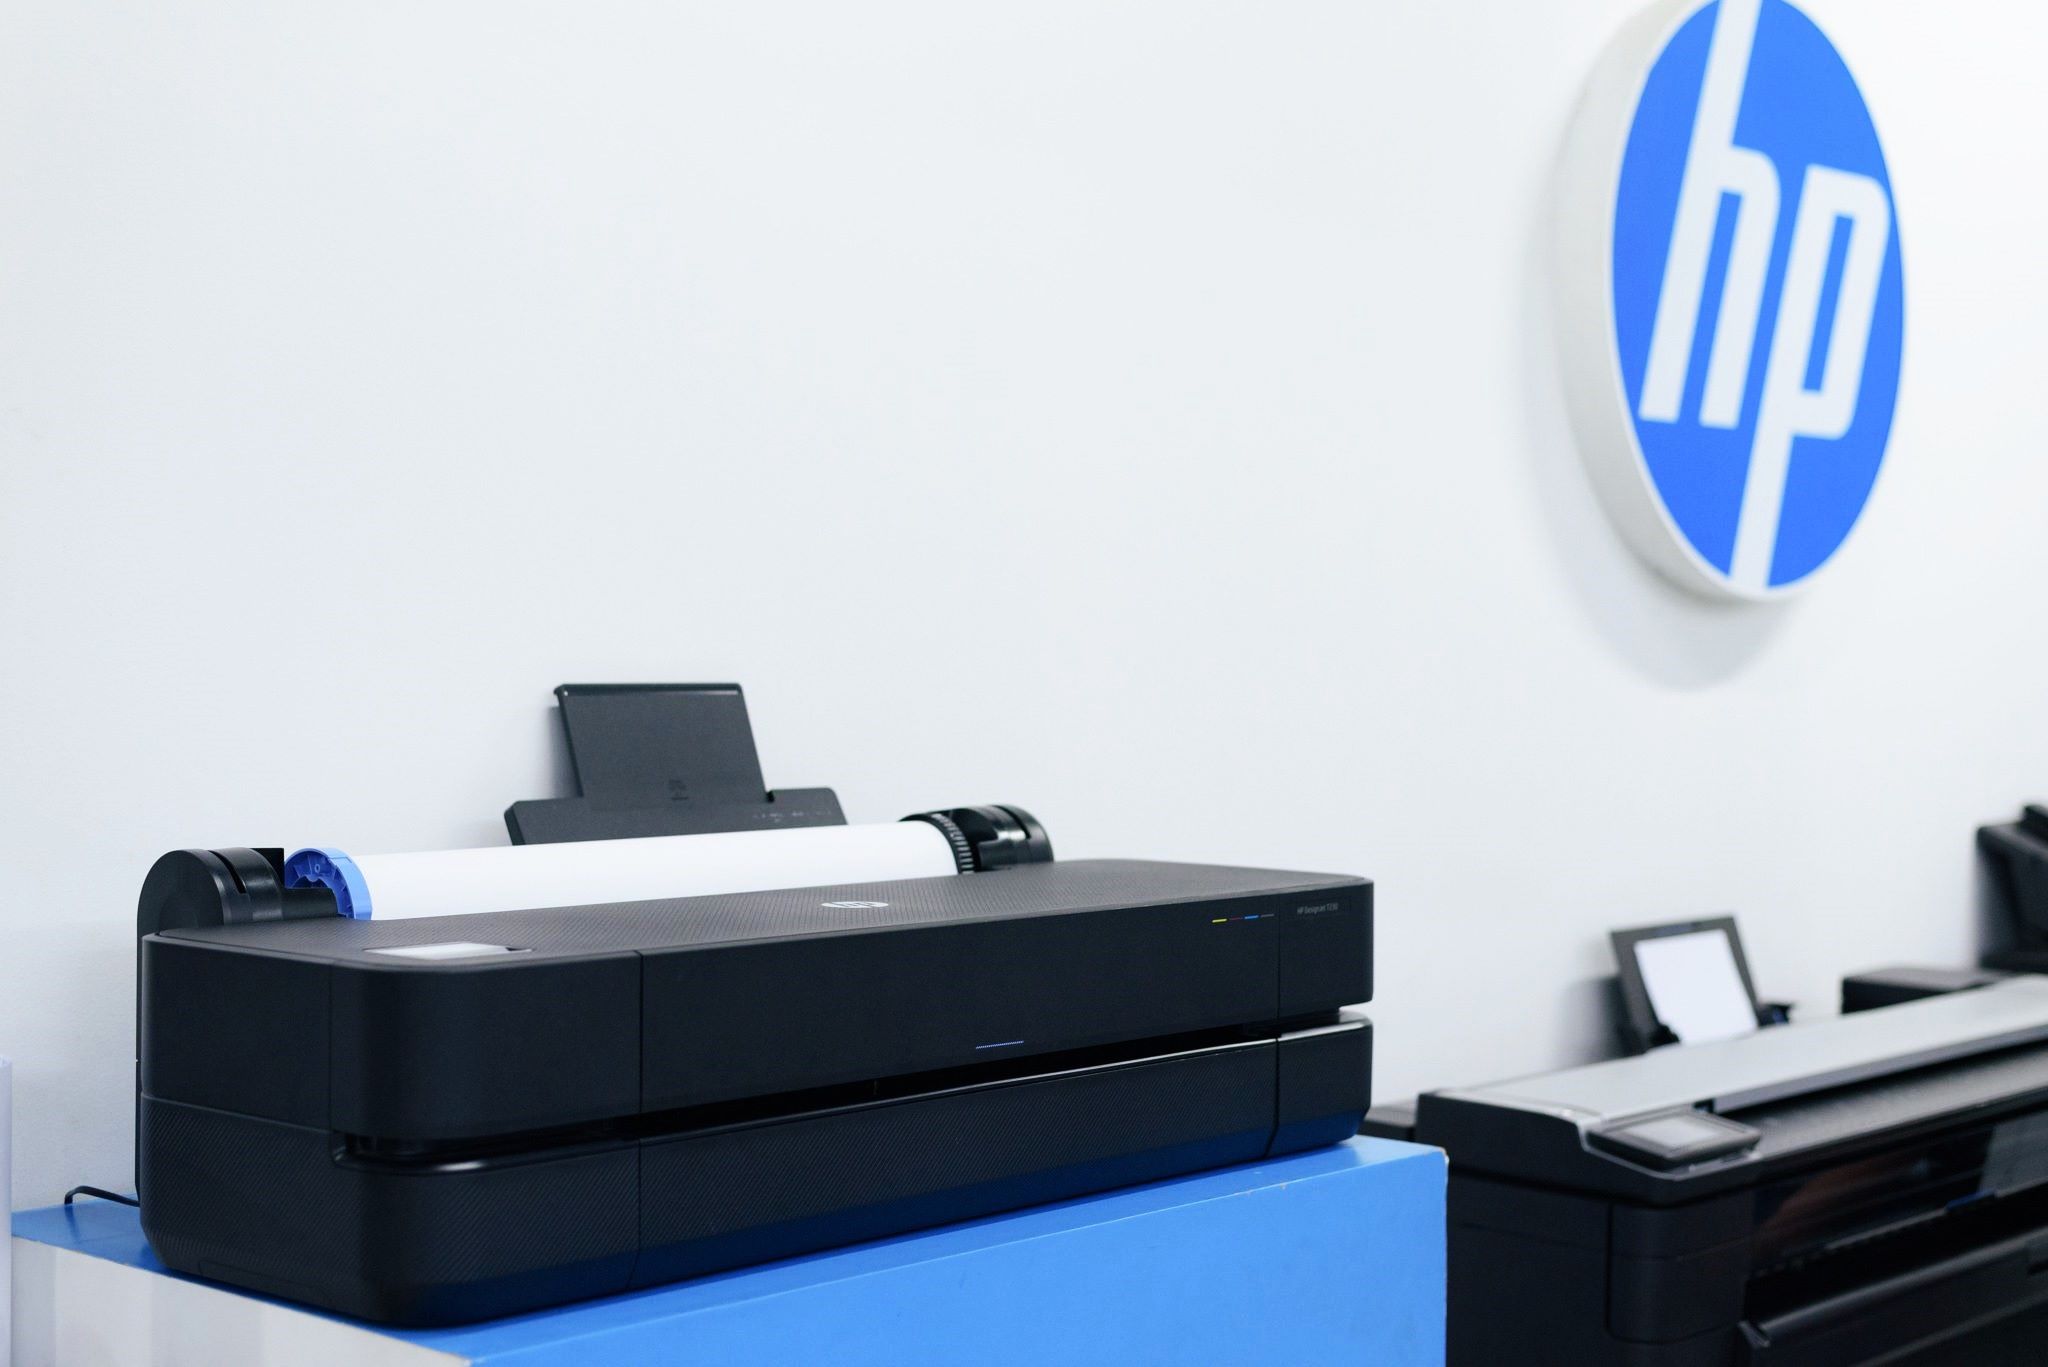 How To Make A Copy On HP Printer